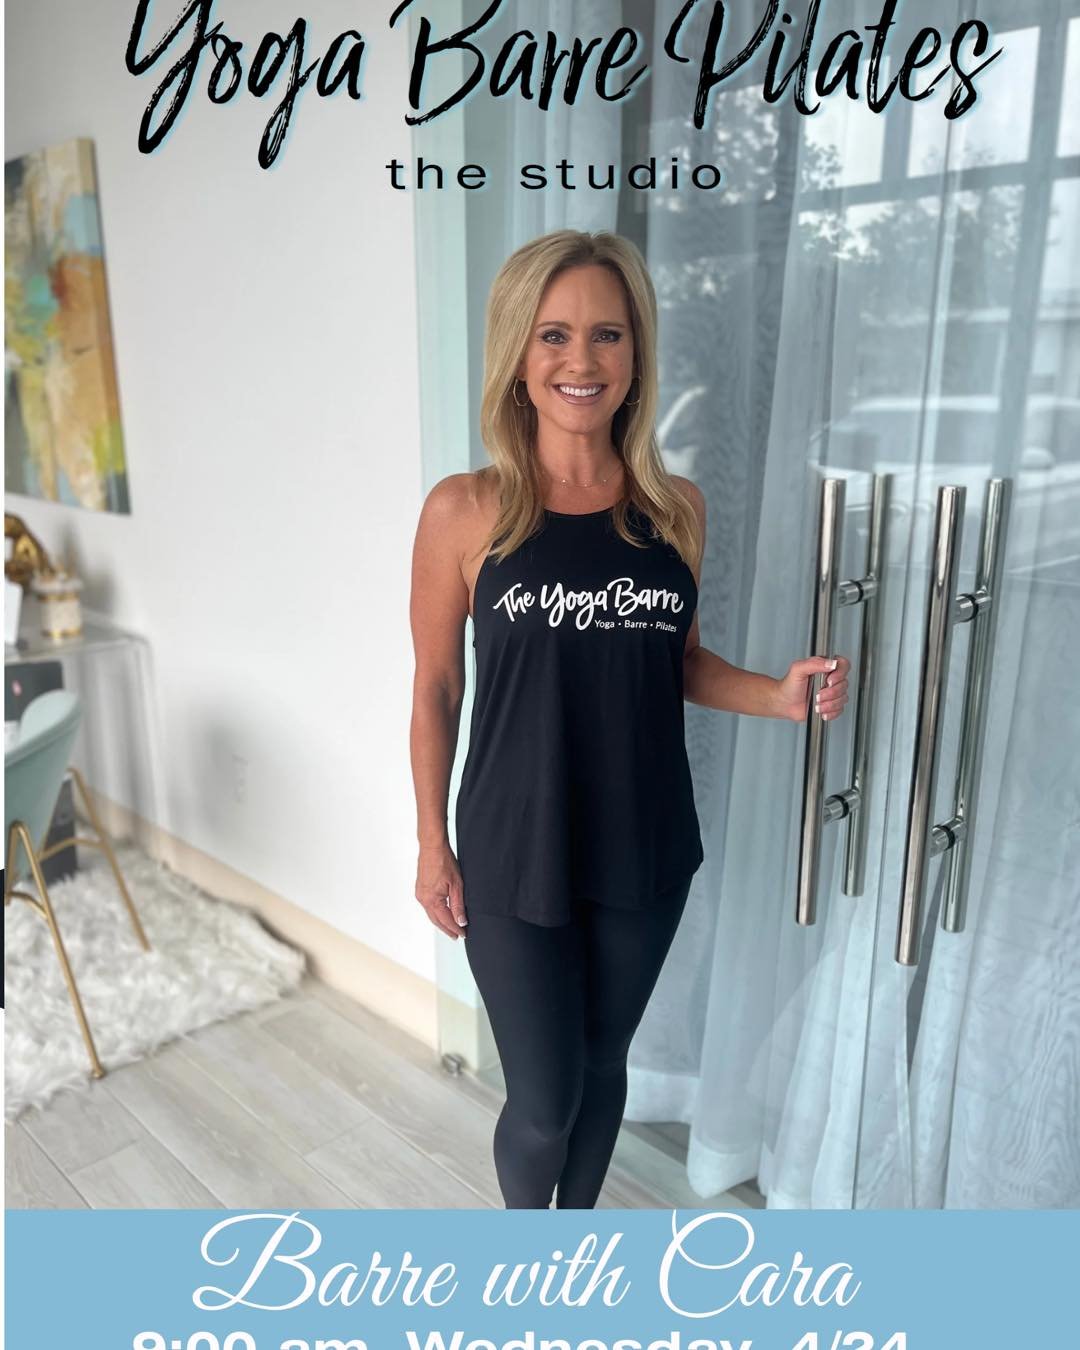 We're thrilled to introduce Cara Karetas as the newest addition to our team of instructors at The Yoga Barre Pilates Studio! 💫

Cara has been a dedicated member of our barre community for several years, and we knew right away that she possessed all 